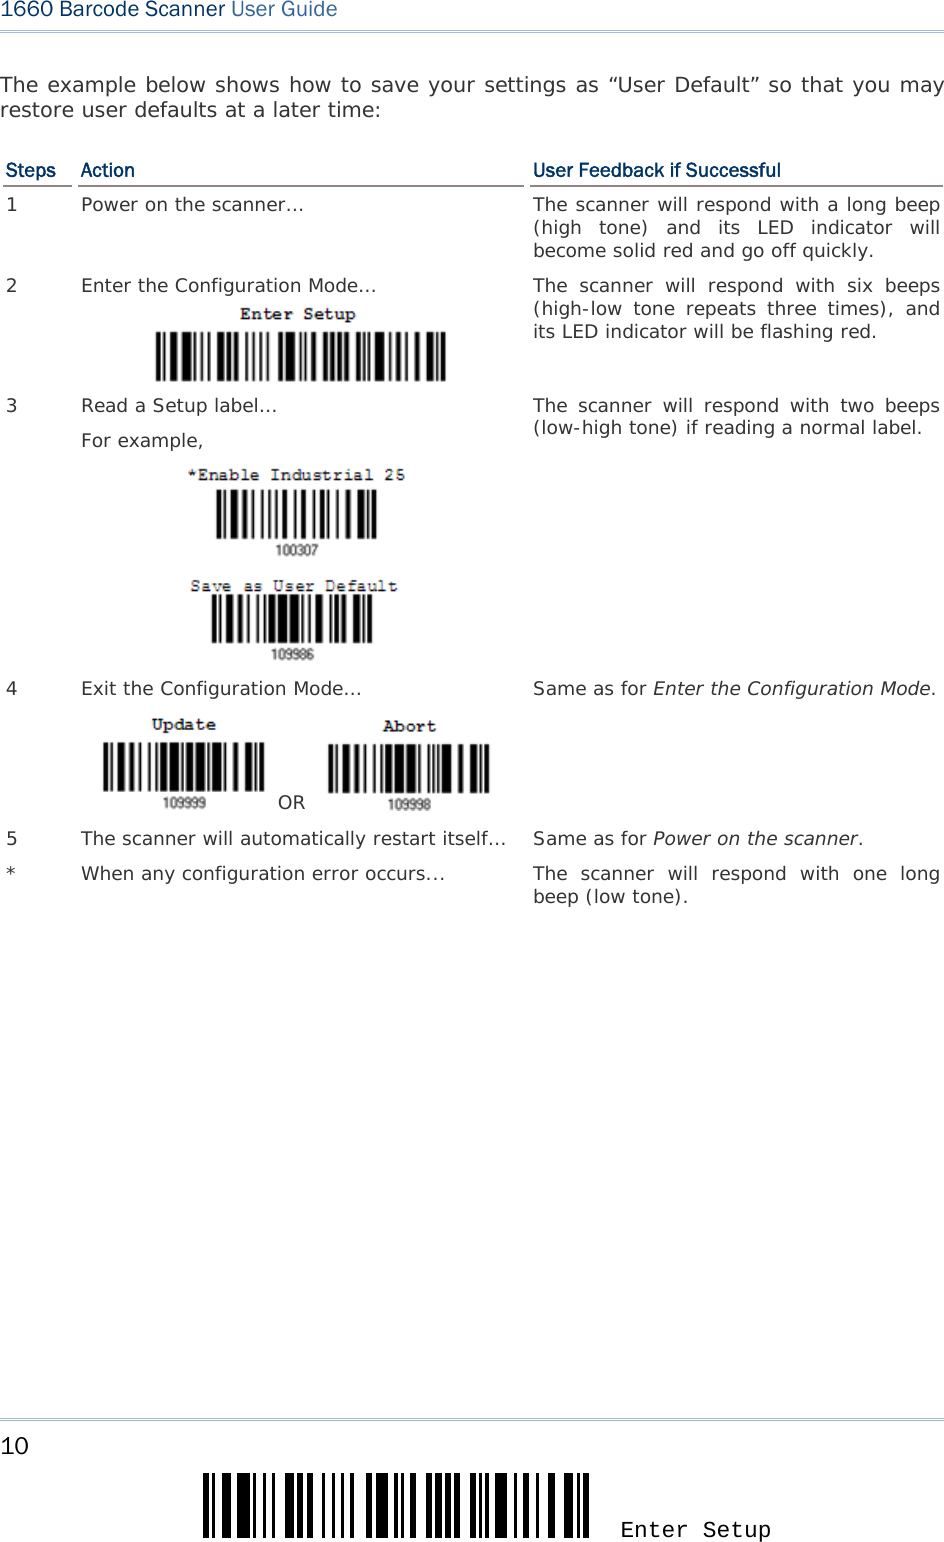 10 Enter Setup 1660 Barcode Scanner User Guide  The example below shows how to save your settings as “User Default” so that you may restore user defaults at a later time: Steps  Action  User Feedback if Successful 1  Power on the scanner… The scanner will respond with a long beep (high tone) and its LED indicator will become solid red and go off quickly. 2  Enter the Configuration Mode… The scanner will respond with six beeps (high-low tone repeats three times), and its LED indicator will be flashing red.  3  Read a Setup label… For example,               The scanner will respond with two beeps (low-high tone) if reading a normal label. 4  Exit the Configuration Mode…     OR    Same as for Enter the Configuration Mode. 5  The scanner will automatically restart itself…  Same as for Power on the scanner. *  When any configuration error occurs... The scanner will respond with one long beep (low tone).  